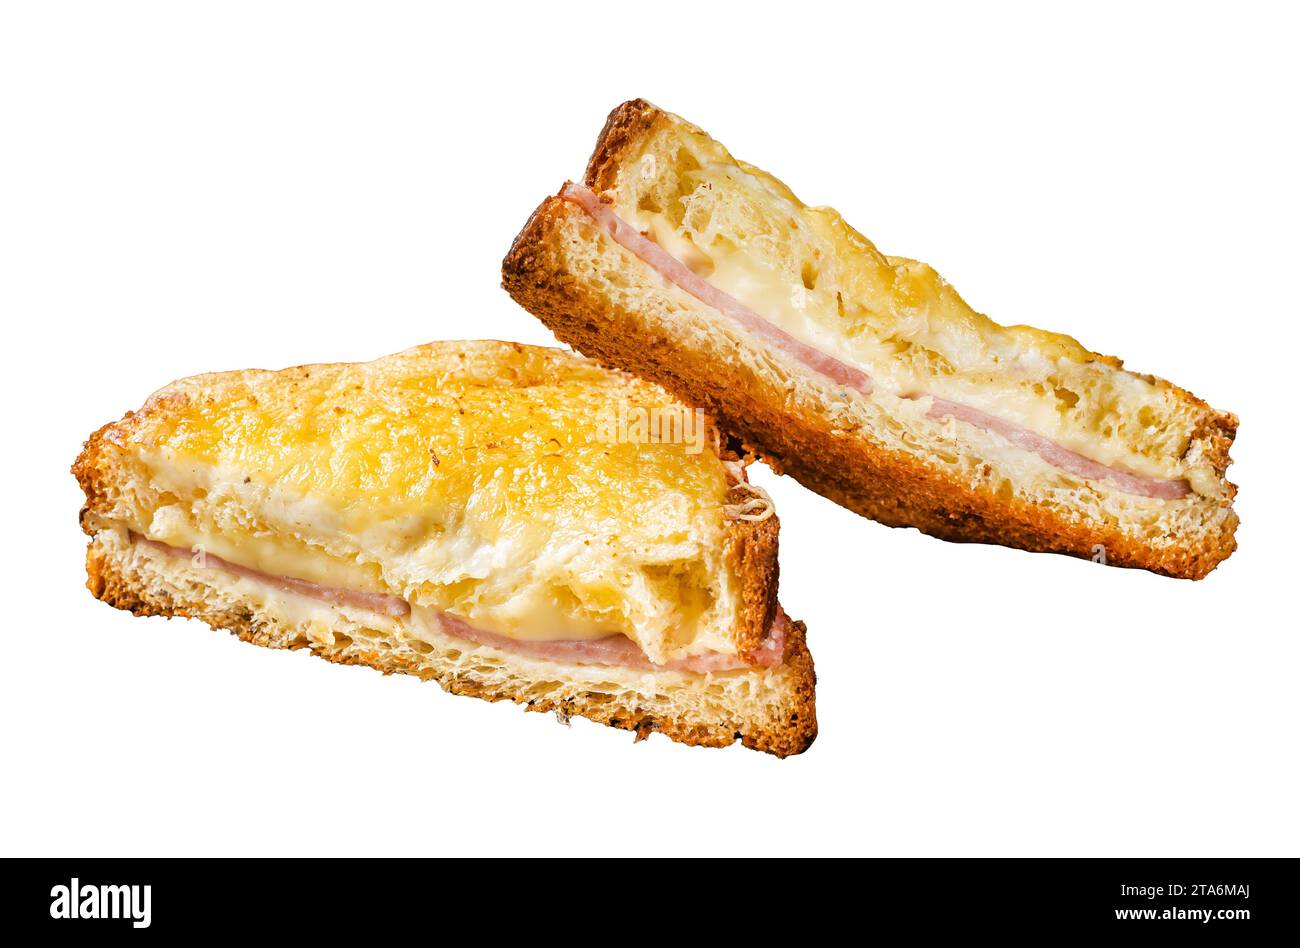 French toasts Croque monsieur and croque madame, grilled sandwiches on brioch bread with sliced ham, melted emmental cheese and egg. Isolated, white b Stock Photo